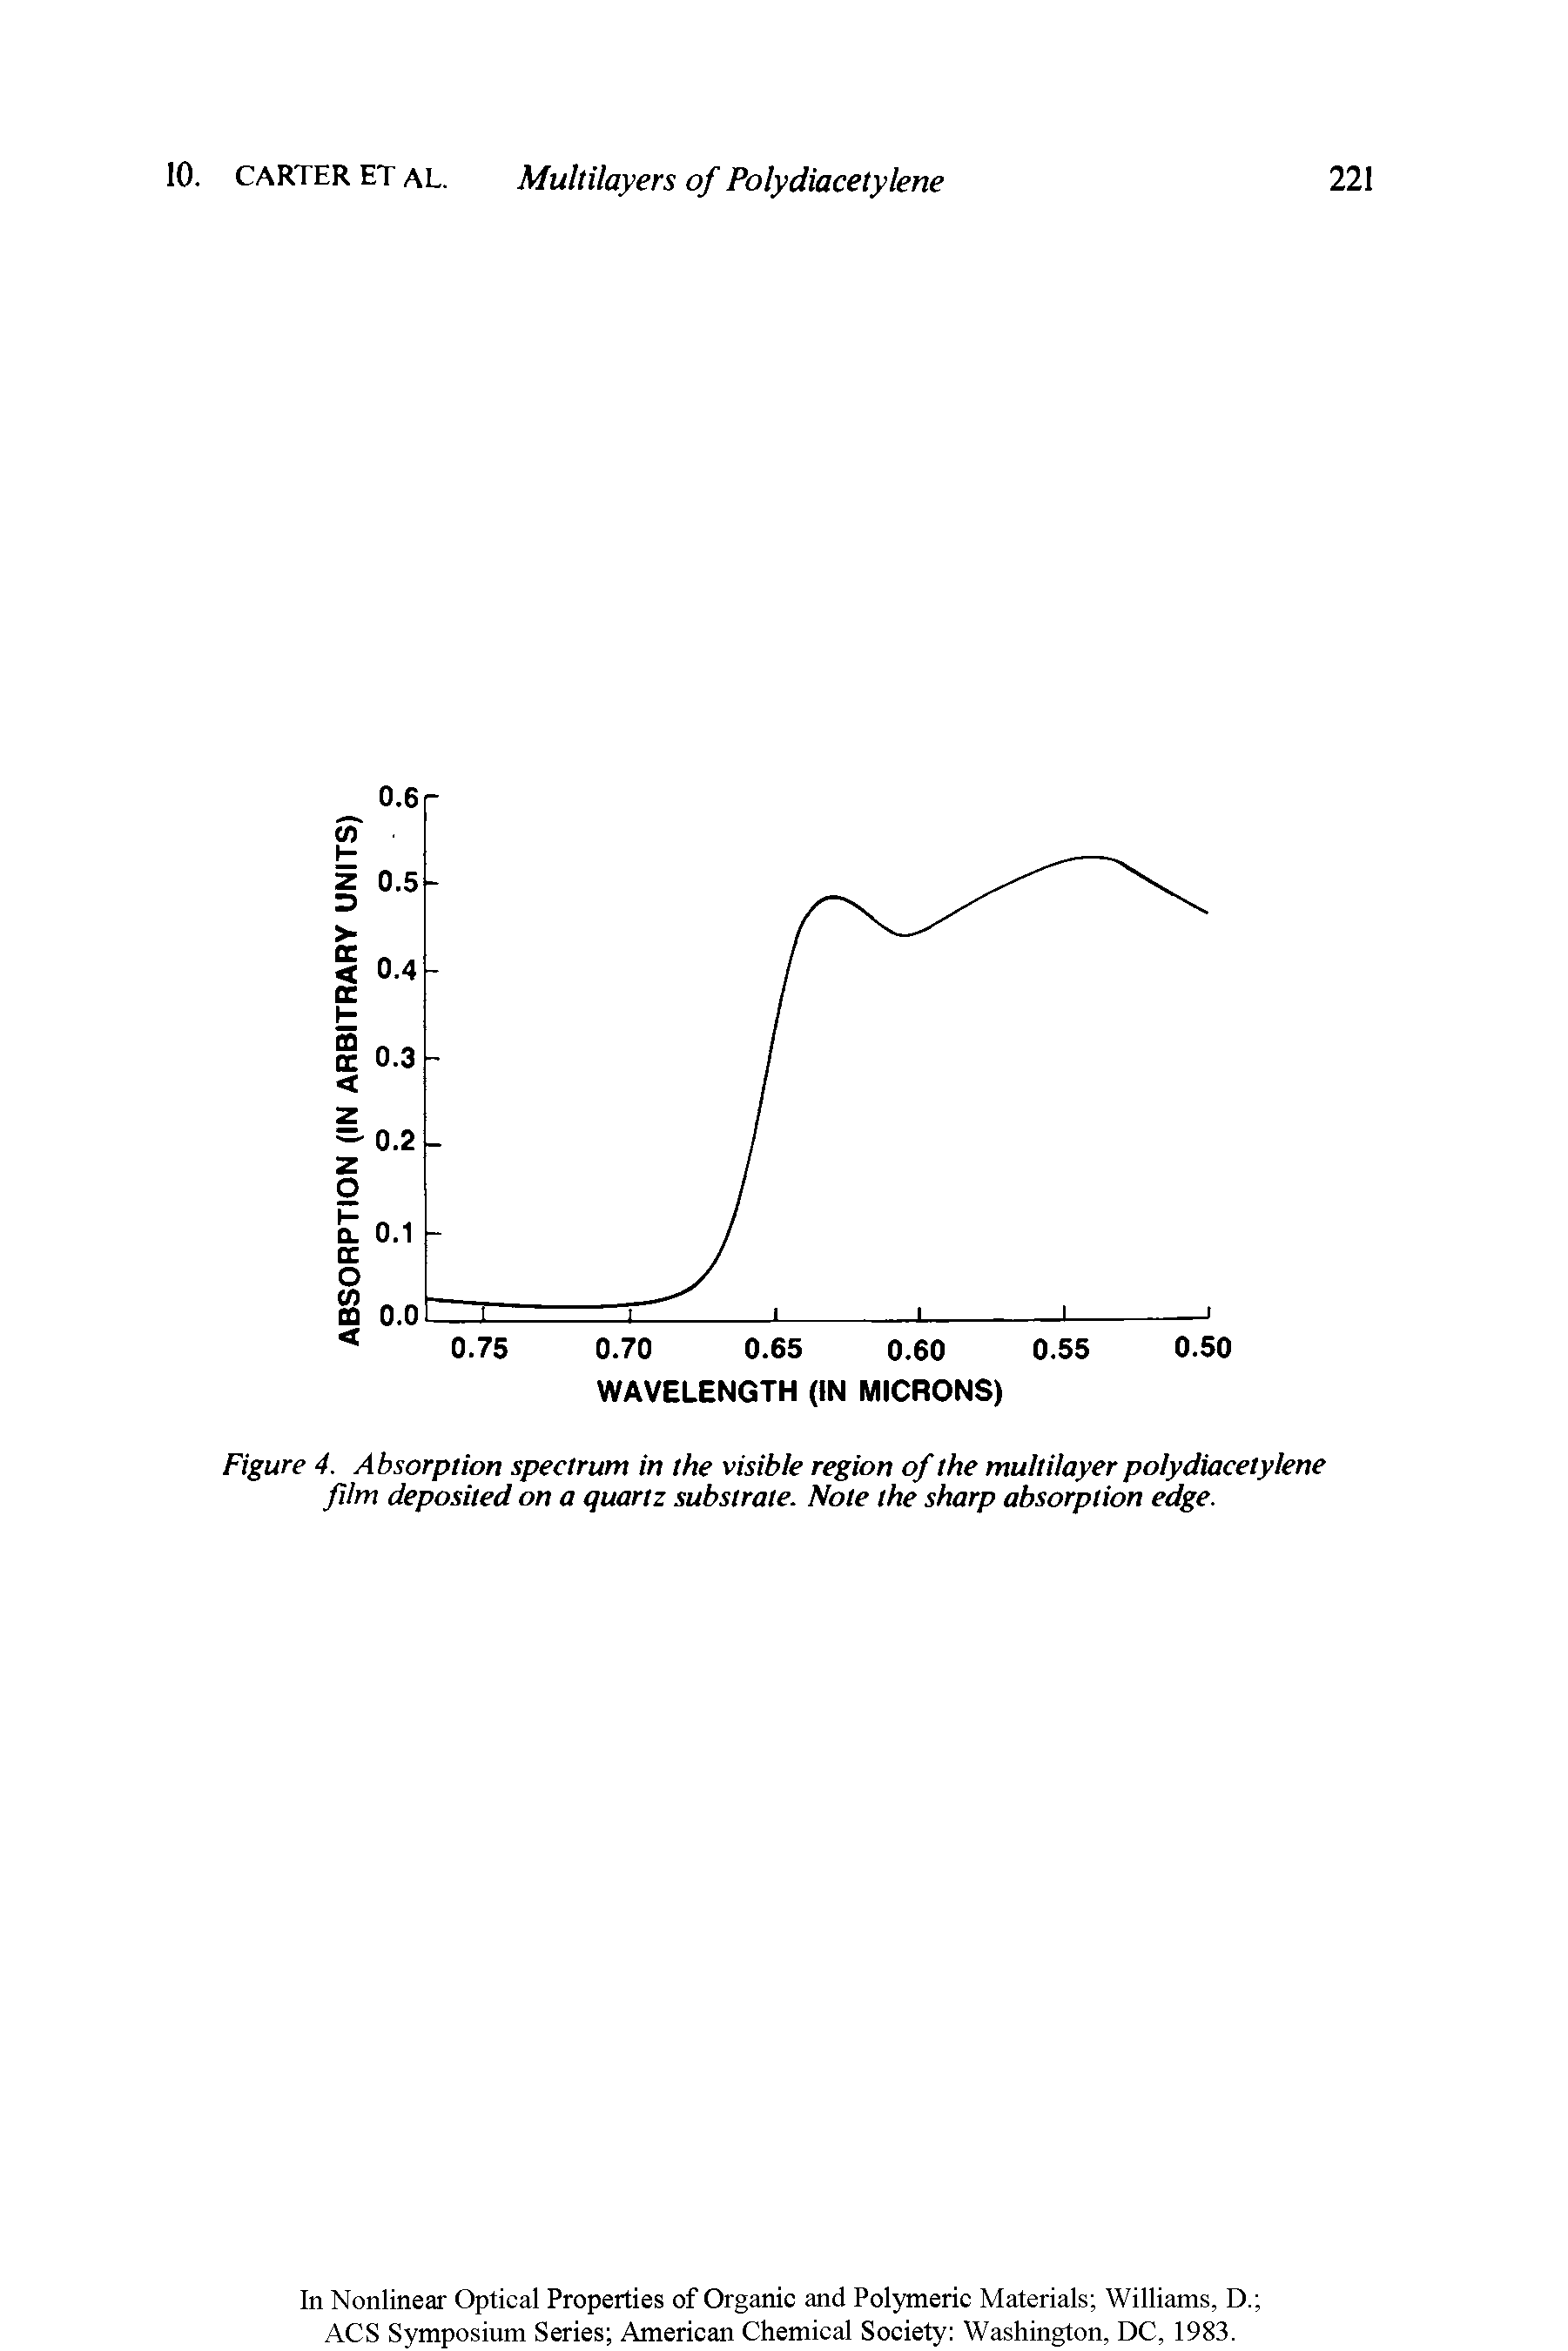 Figure 4. Absorption spectrum in the visible region of the multilayer polydiacetylene film deposited on a quartz substrate. Note the sharp absorption edge.